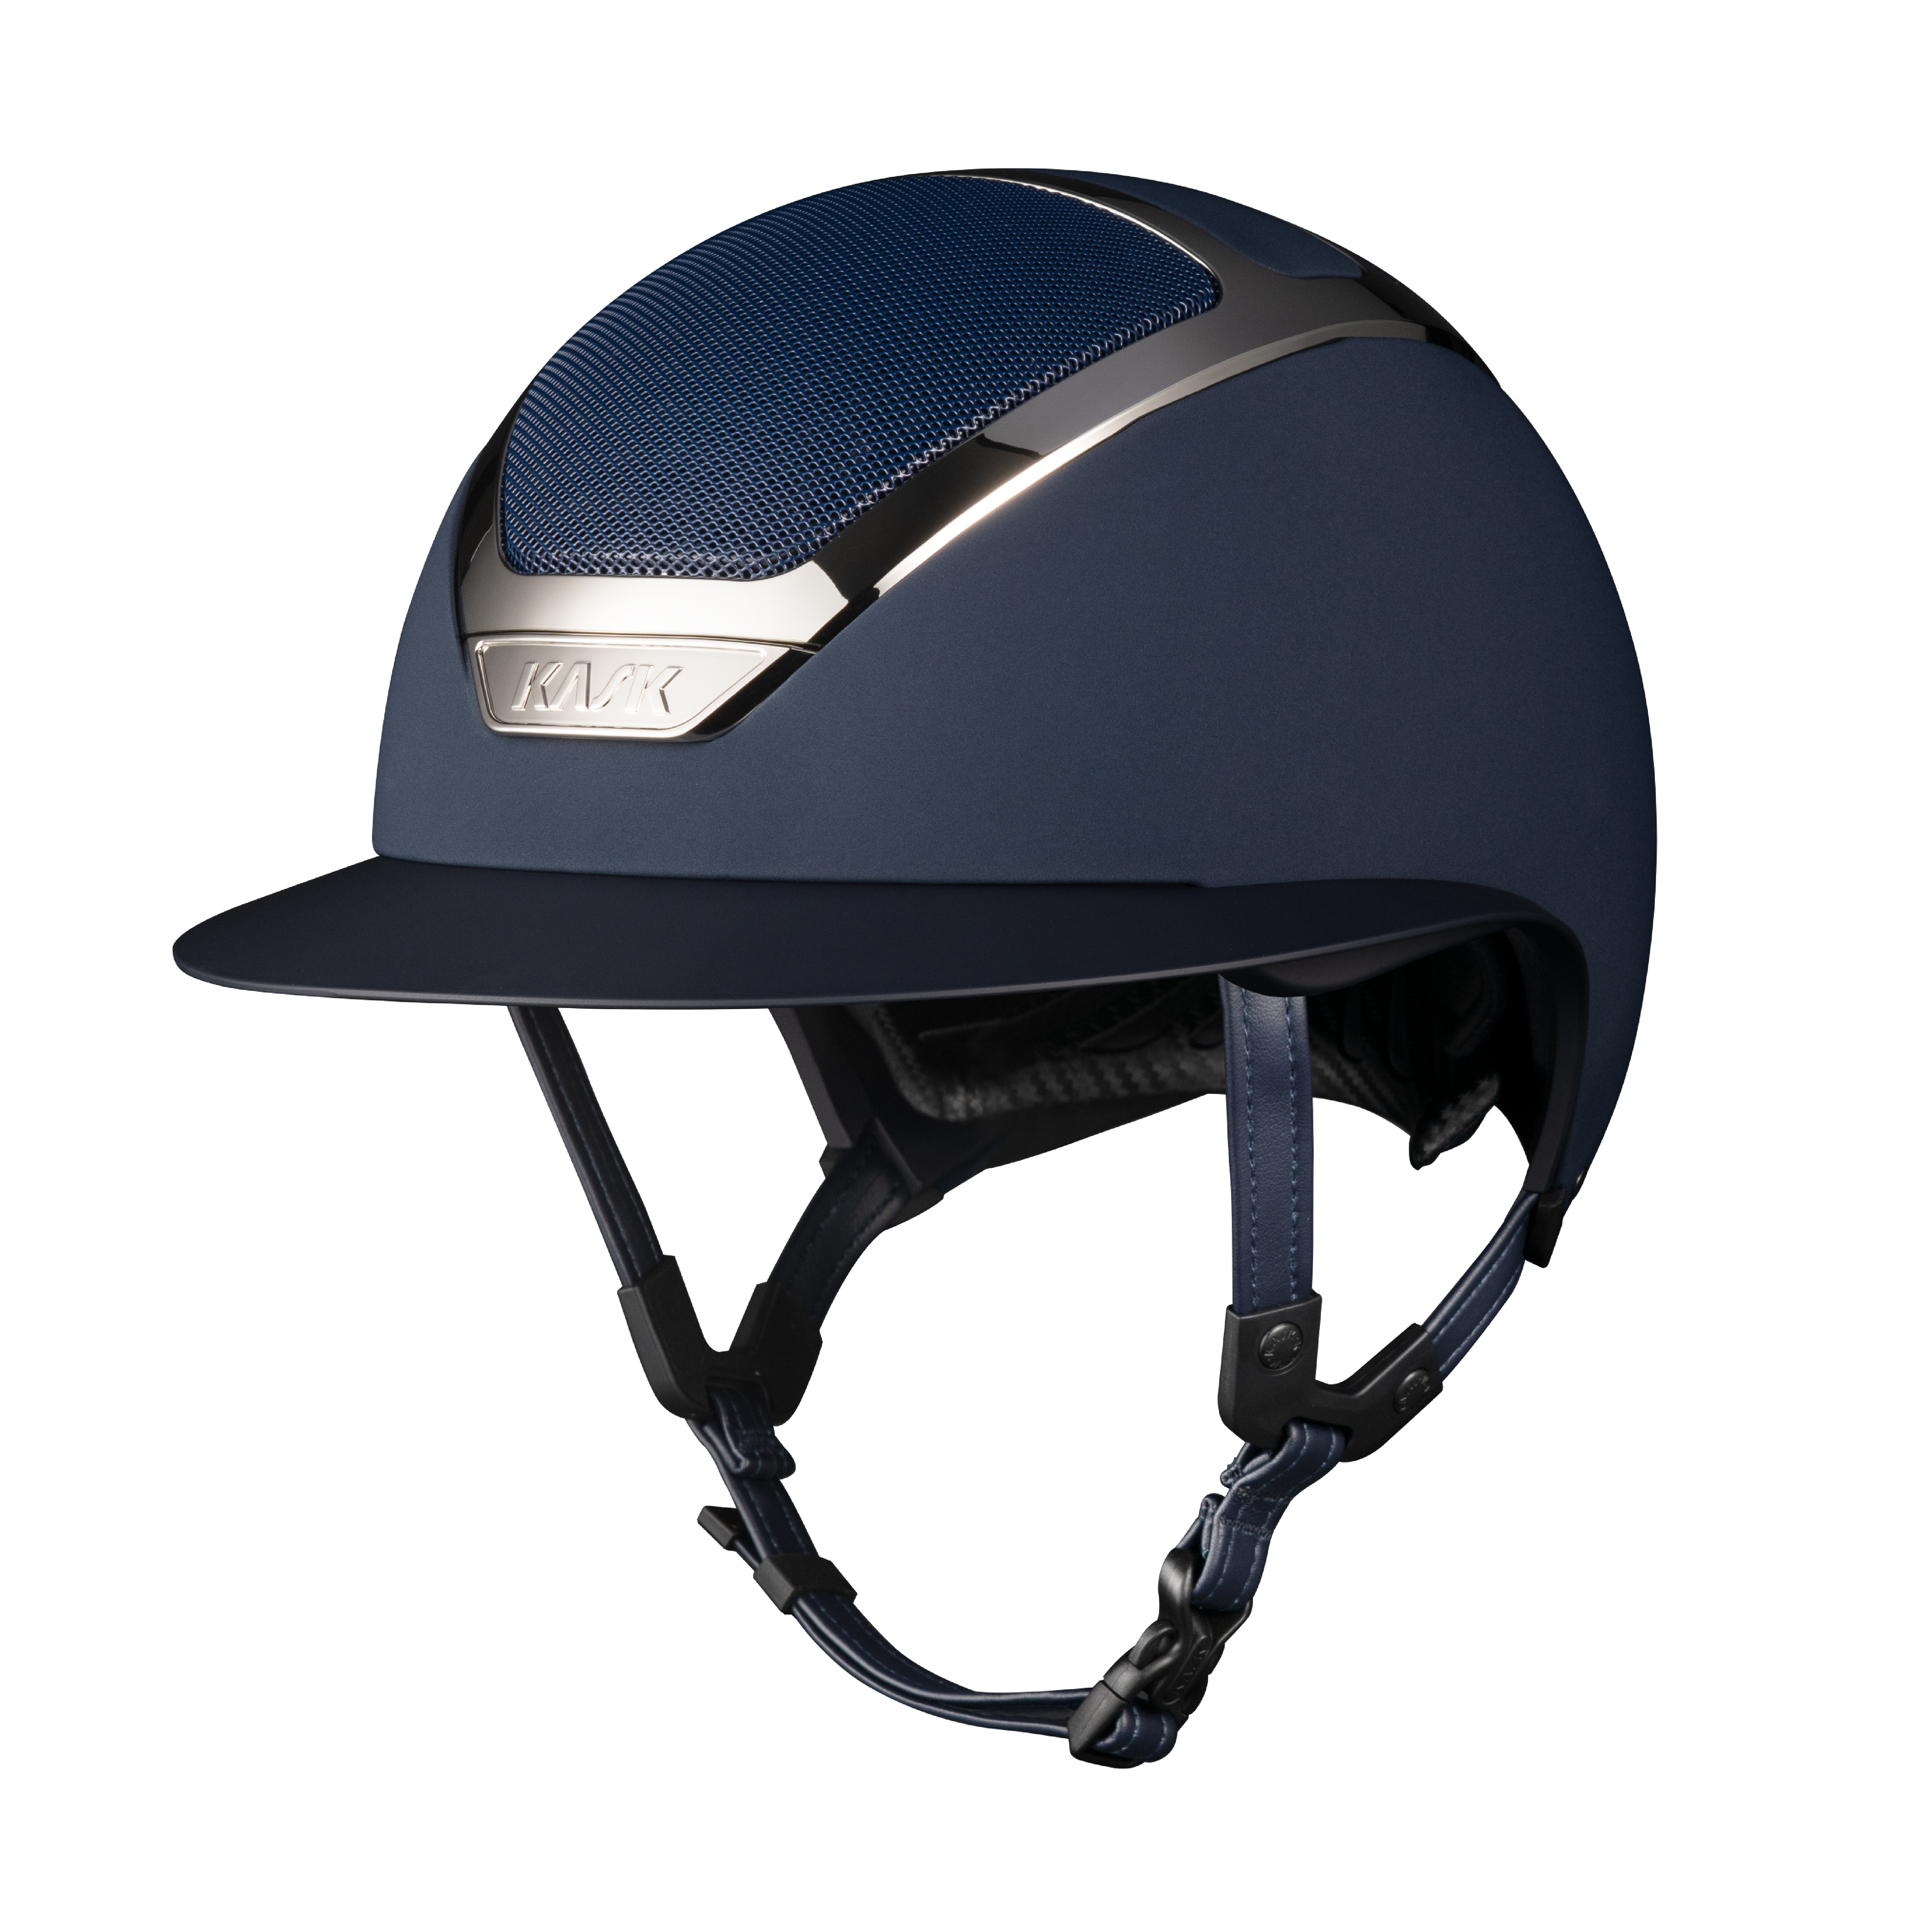 KASK Kask Reithelm Star Lady Chrome - navy/silver - 53 - 3